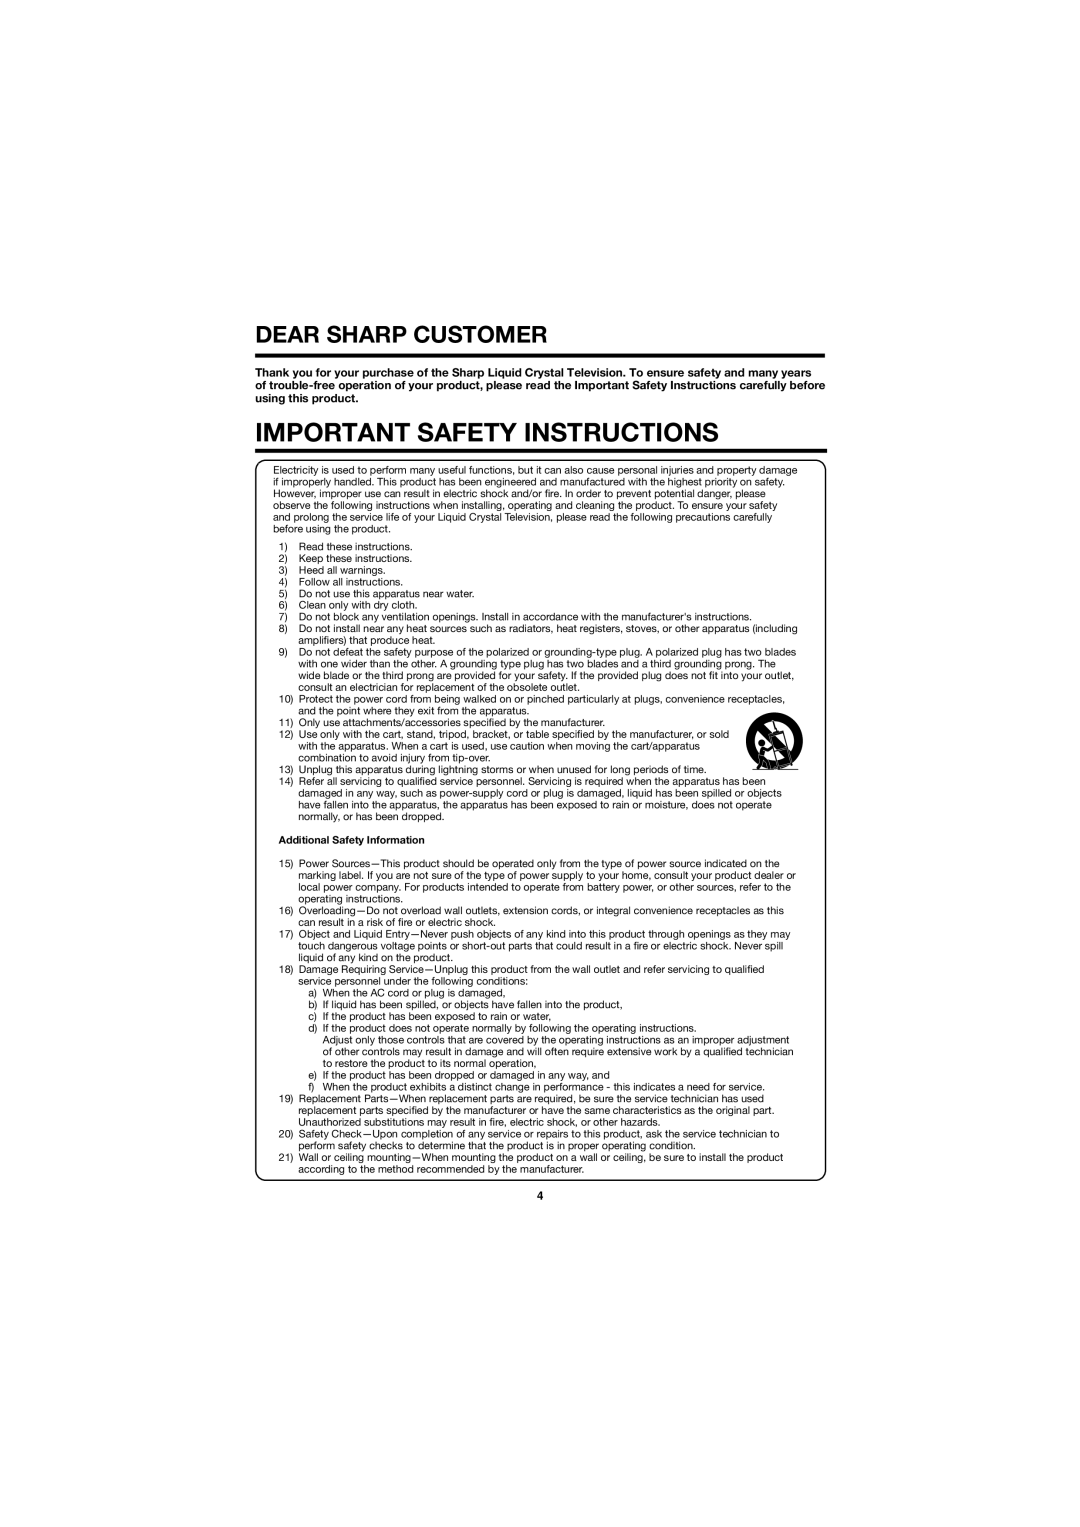 Sharp LC32D47UT operation manual Important Safety Instructions, Dear Sharp Customer, Additional Safety Information 